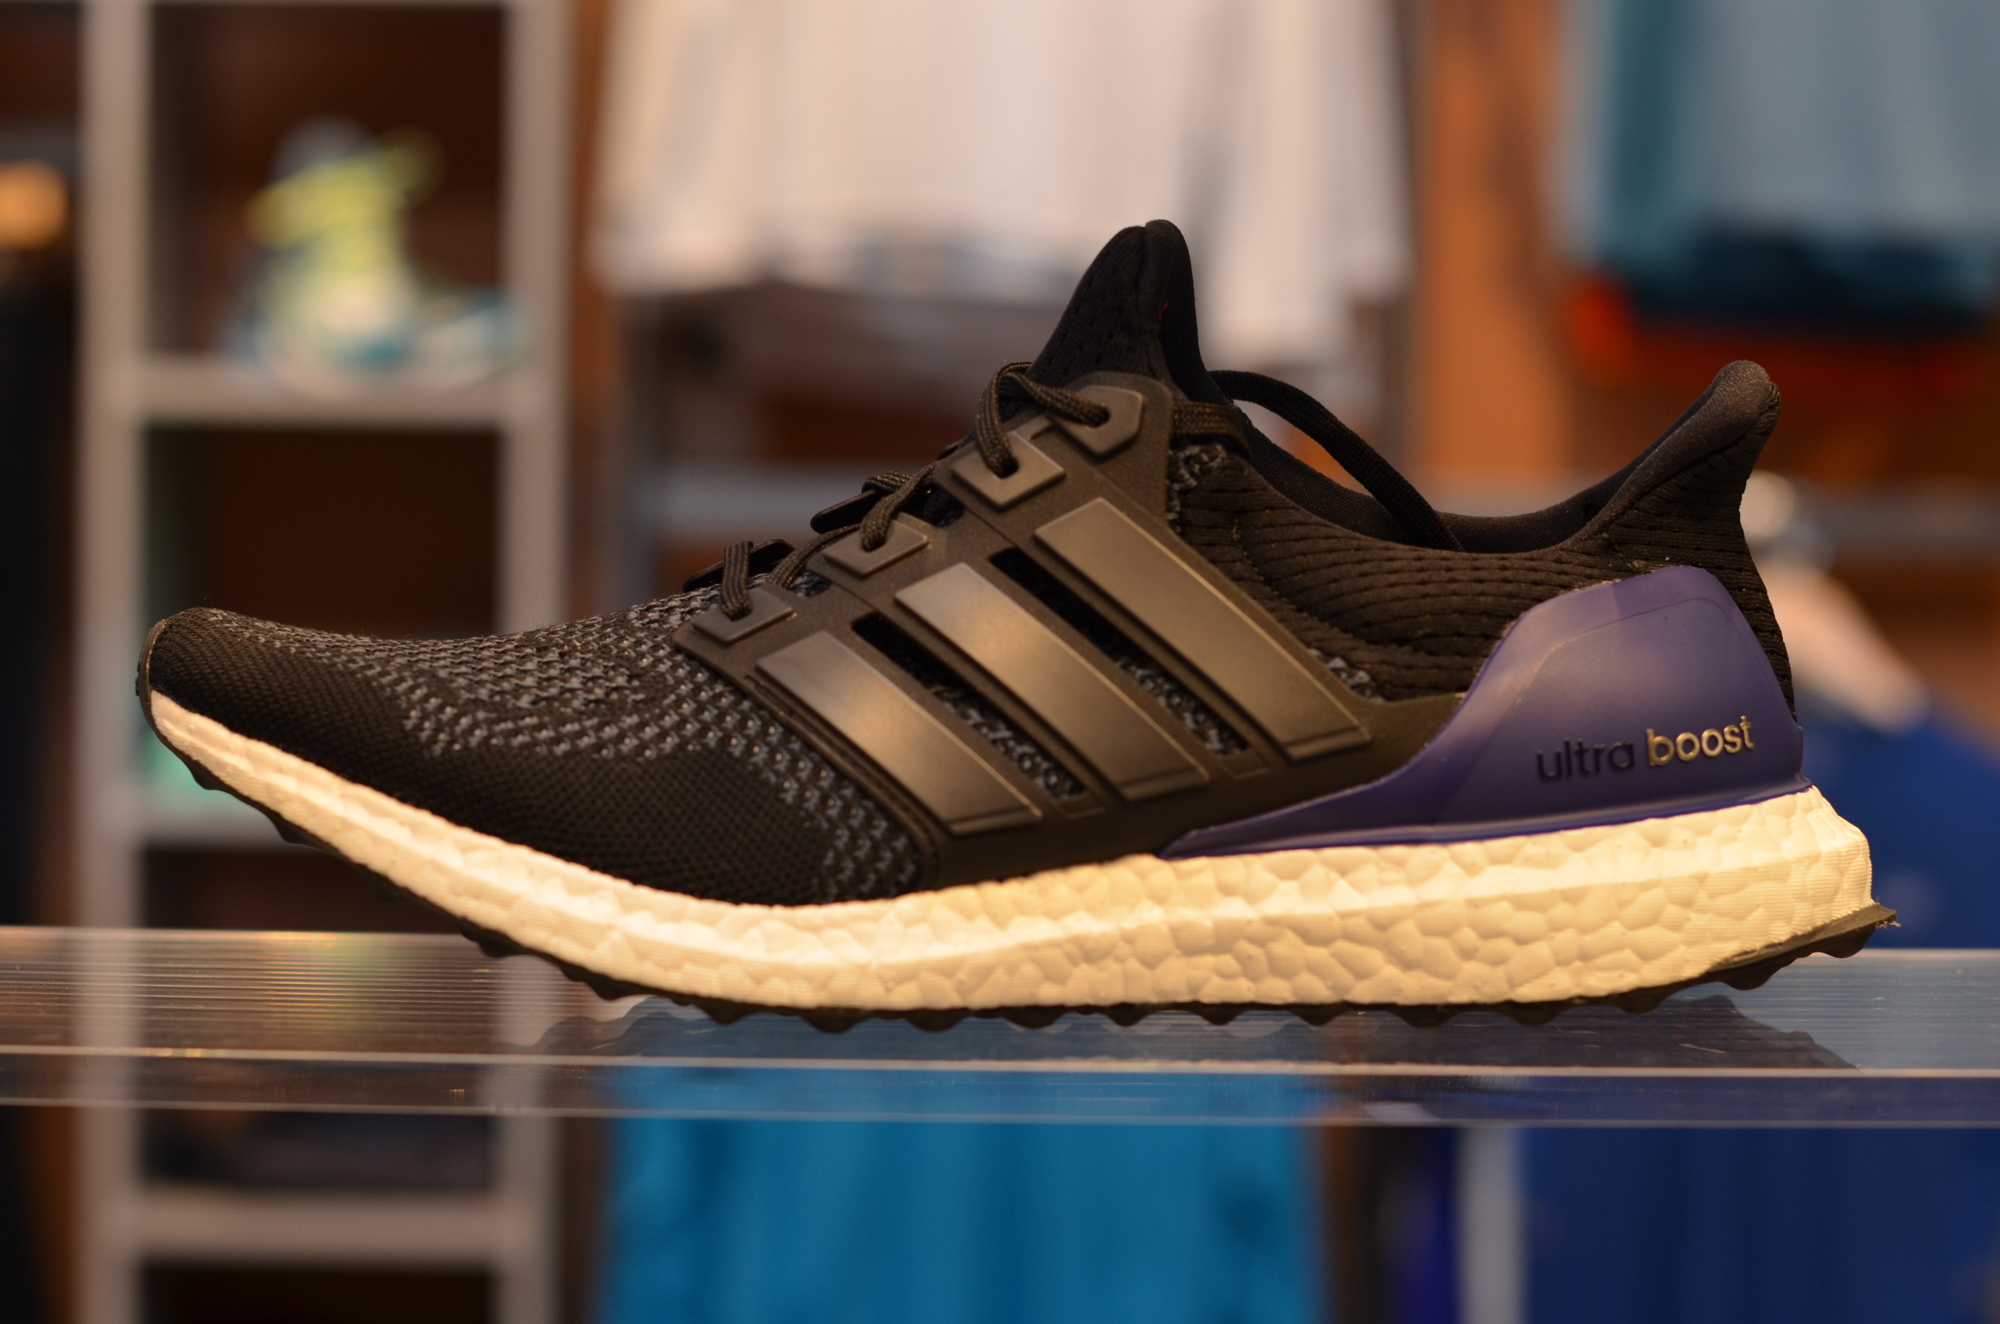 Adidas Ultra Boost (men’s), $180, at Fleet Feet Sarasota. This shoe’s upper is completely knitted like a sock, with a four-way stretch rubber sole for softer shock absorption.